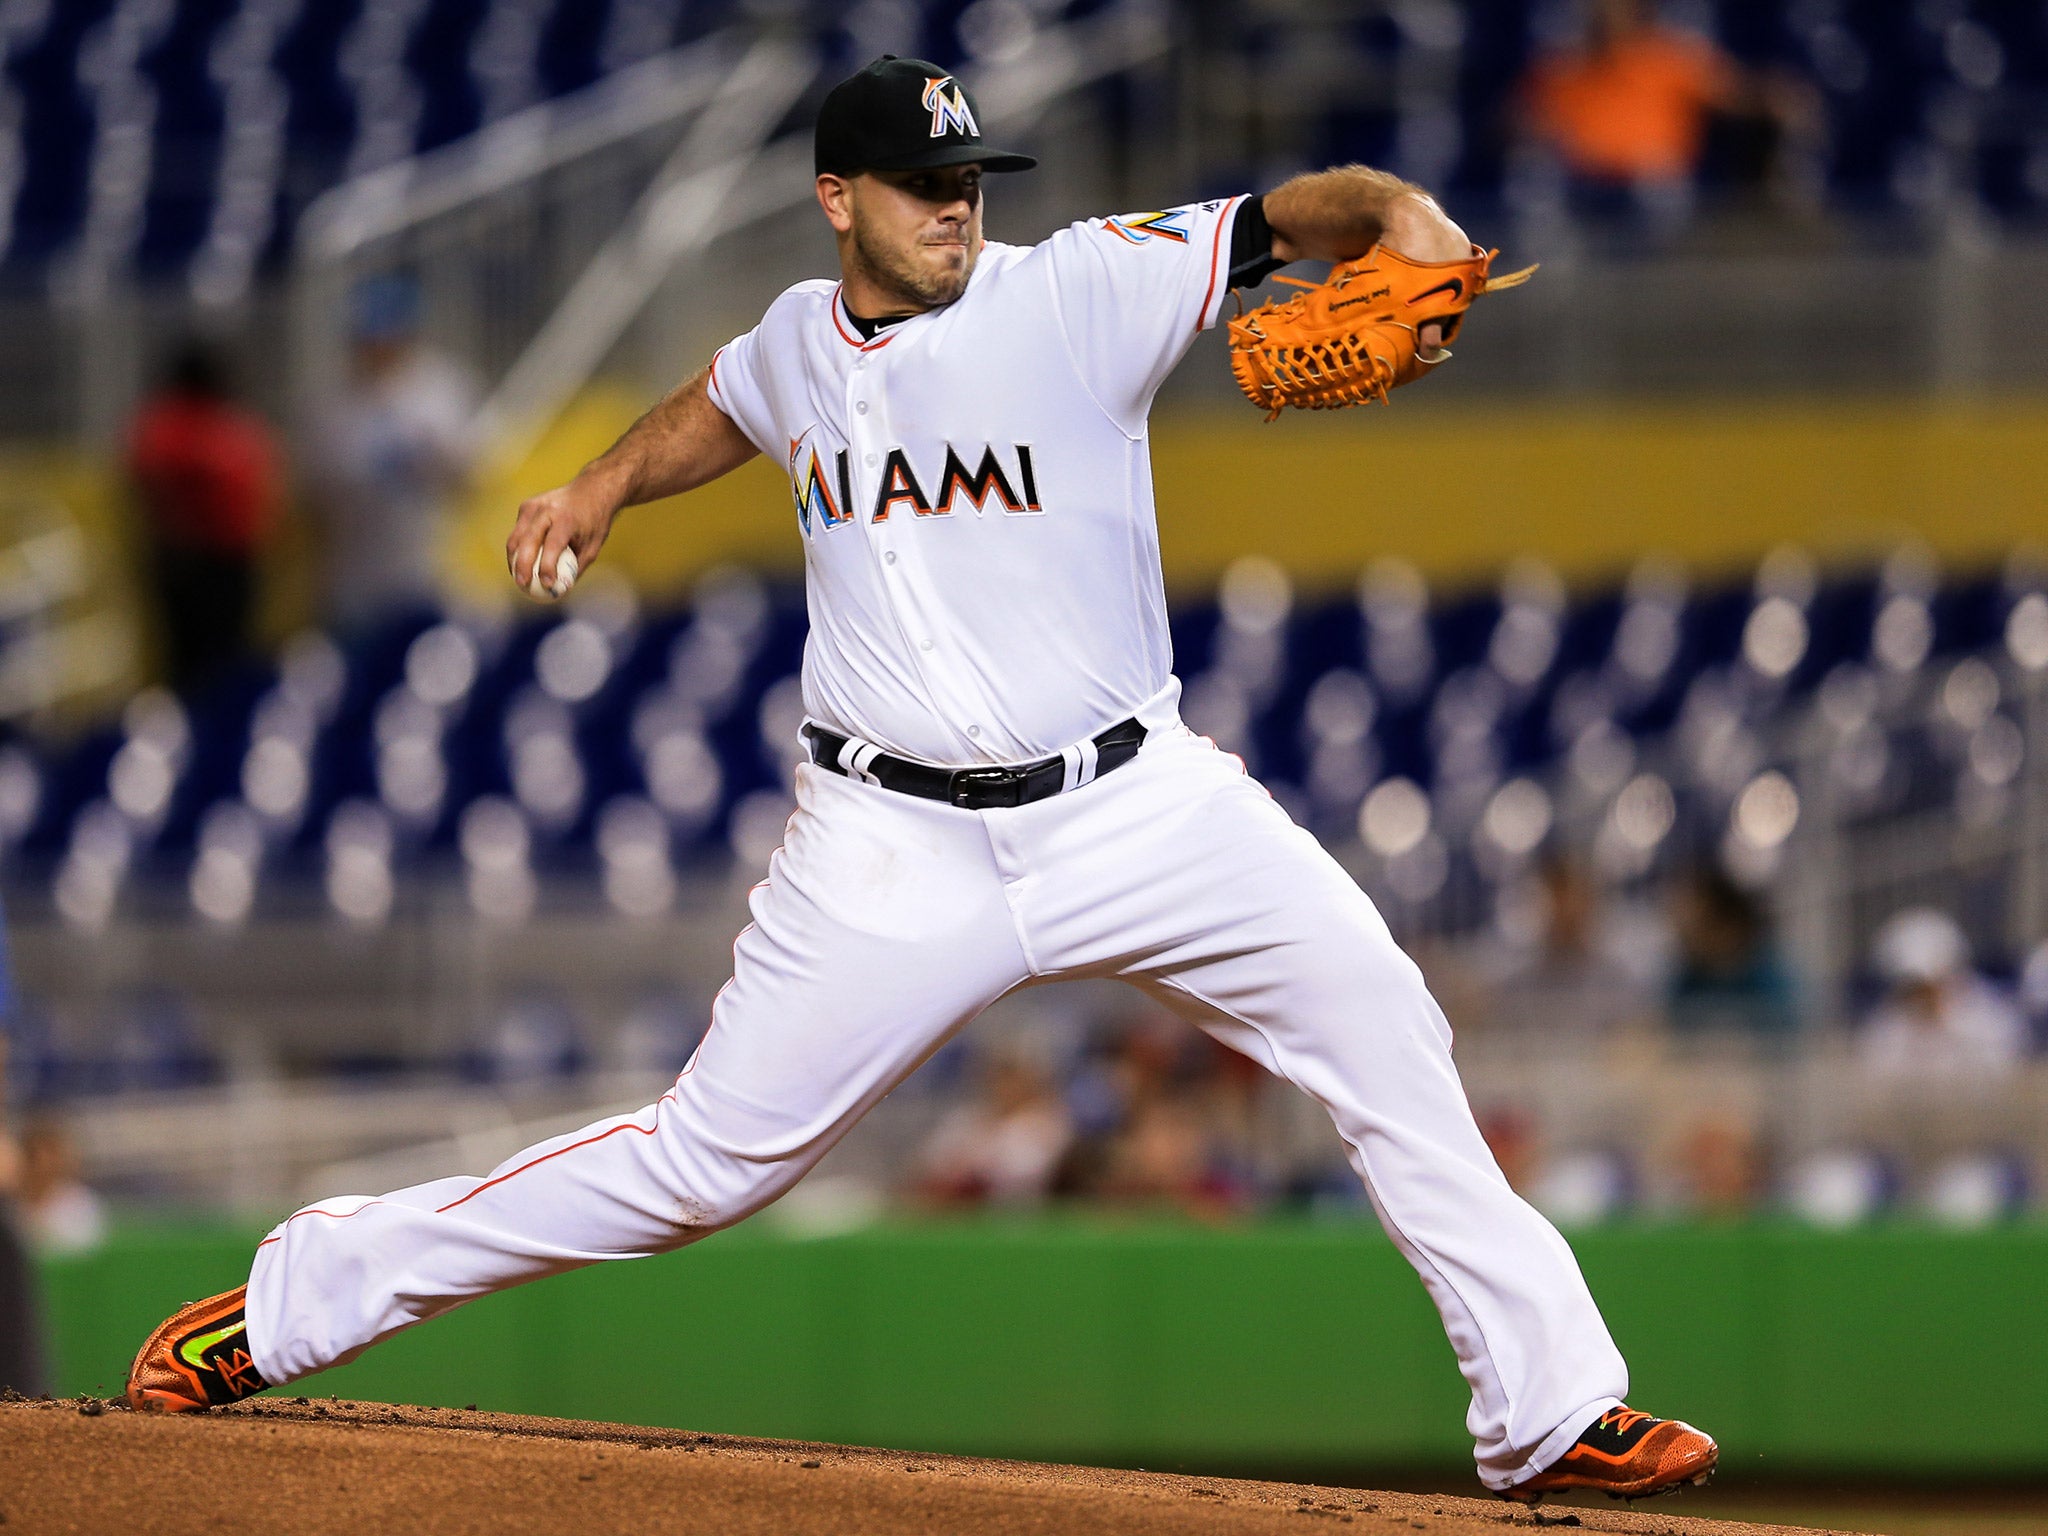 Jose Fernandez Had Cocaine and Alcohol in System When He Died in Boat Crash  - The New York Times